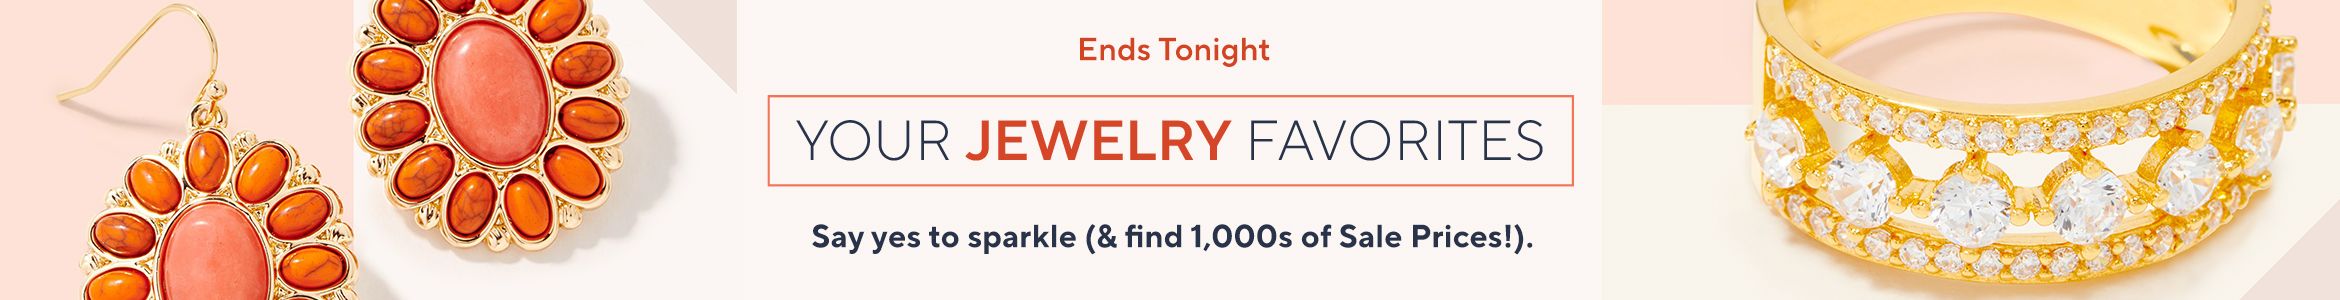 Ends Tonight - Your Jewelry Favorites - Say yes to sparkle (& find 1,000s of Sale Prices!).